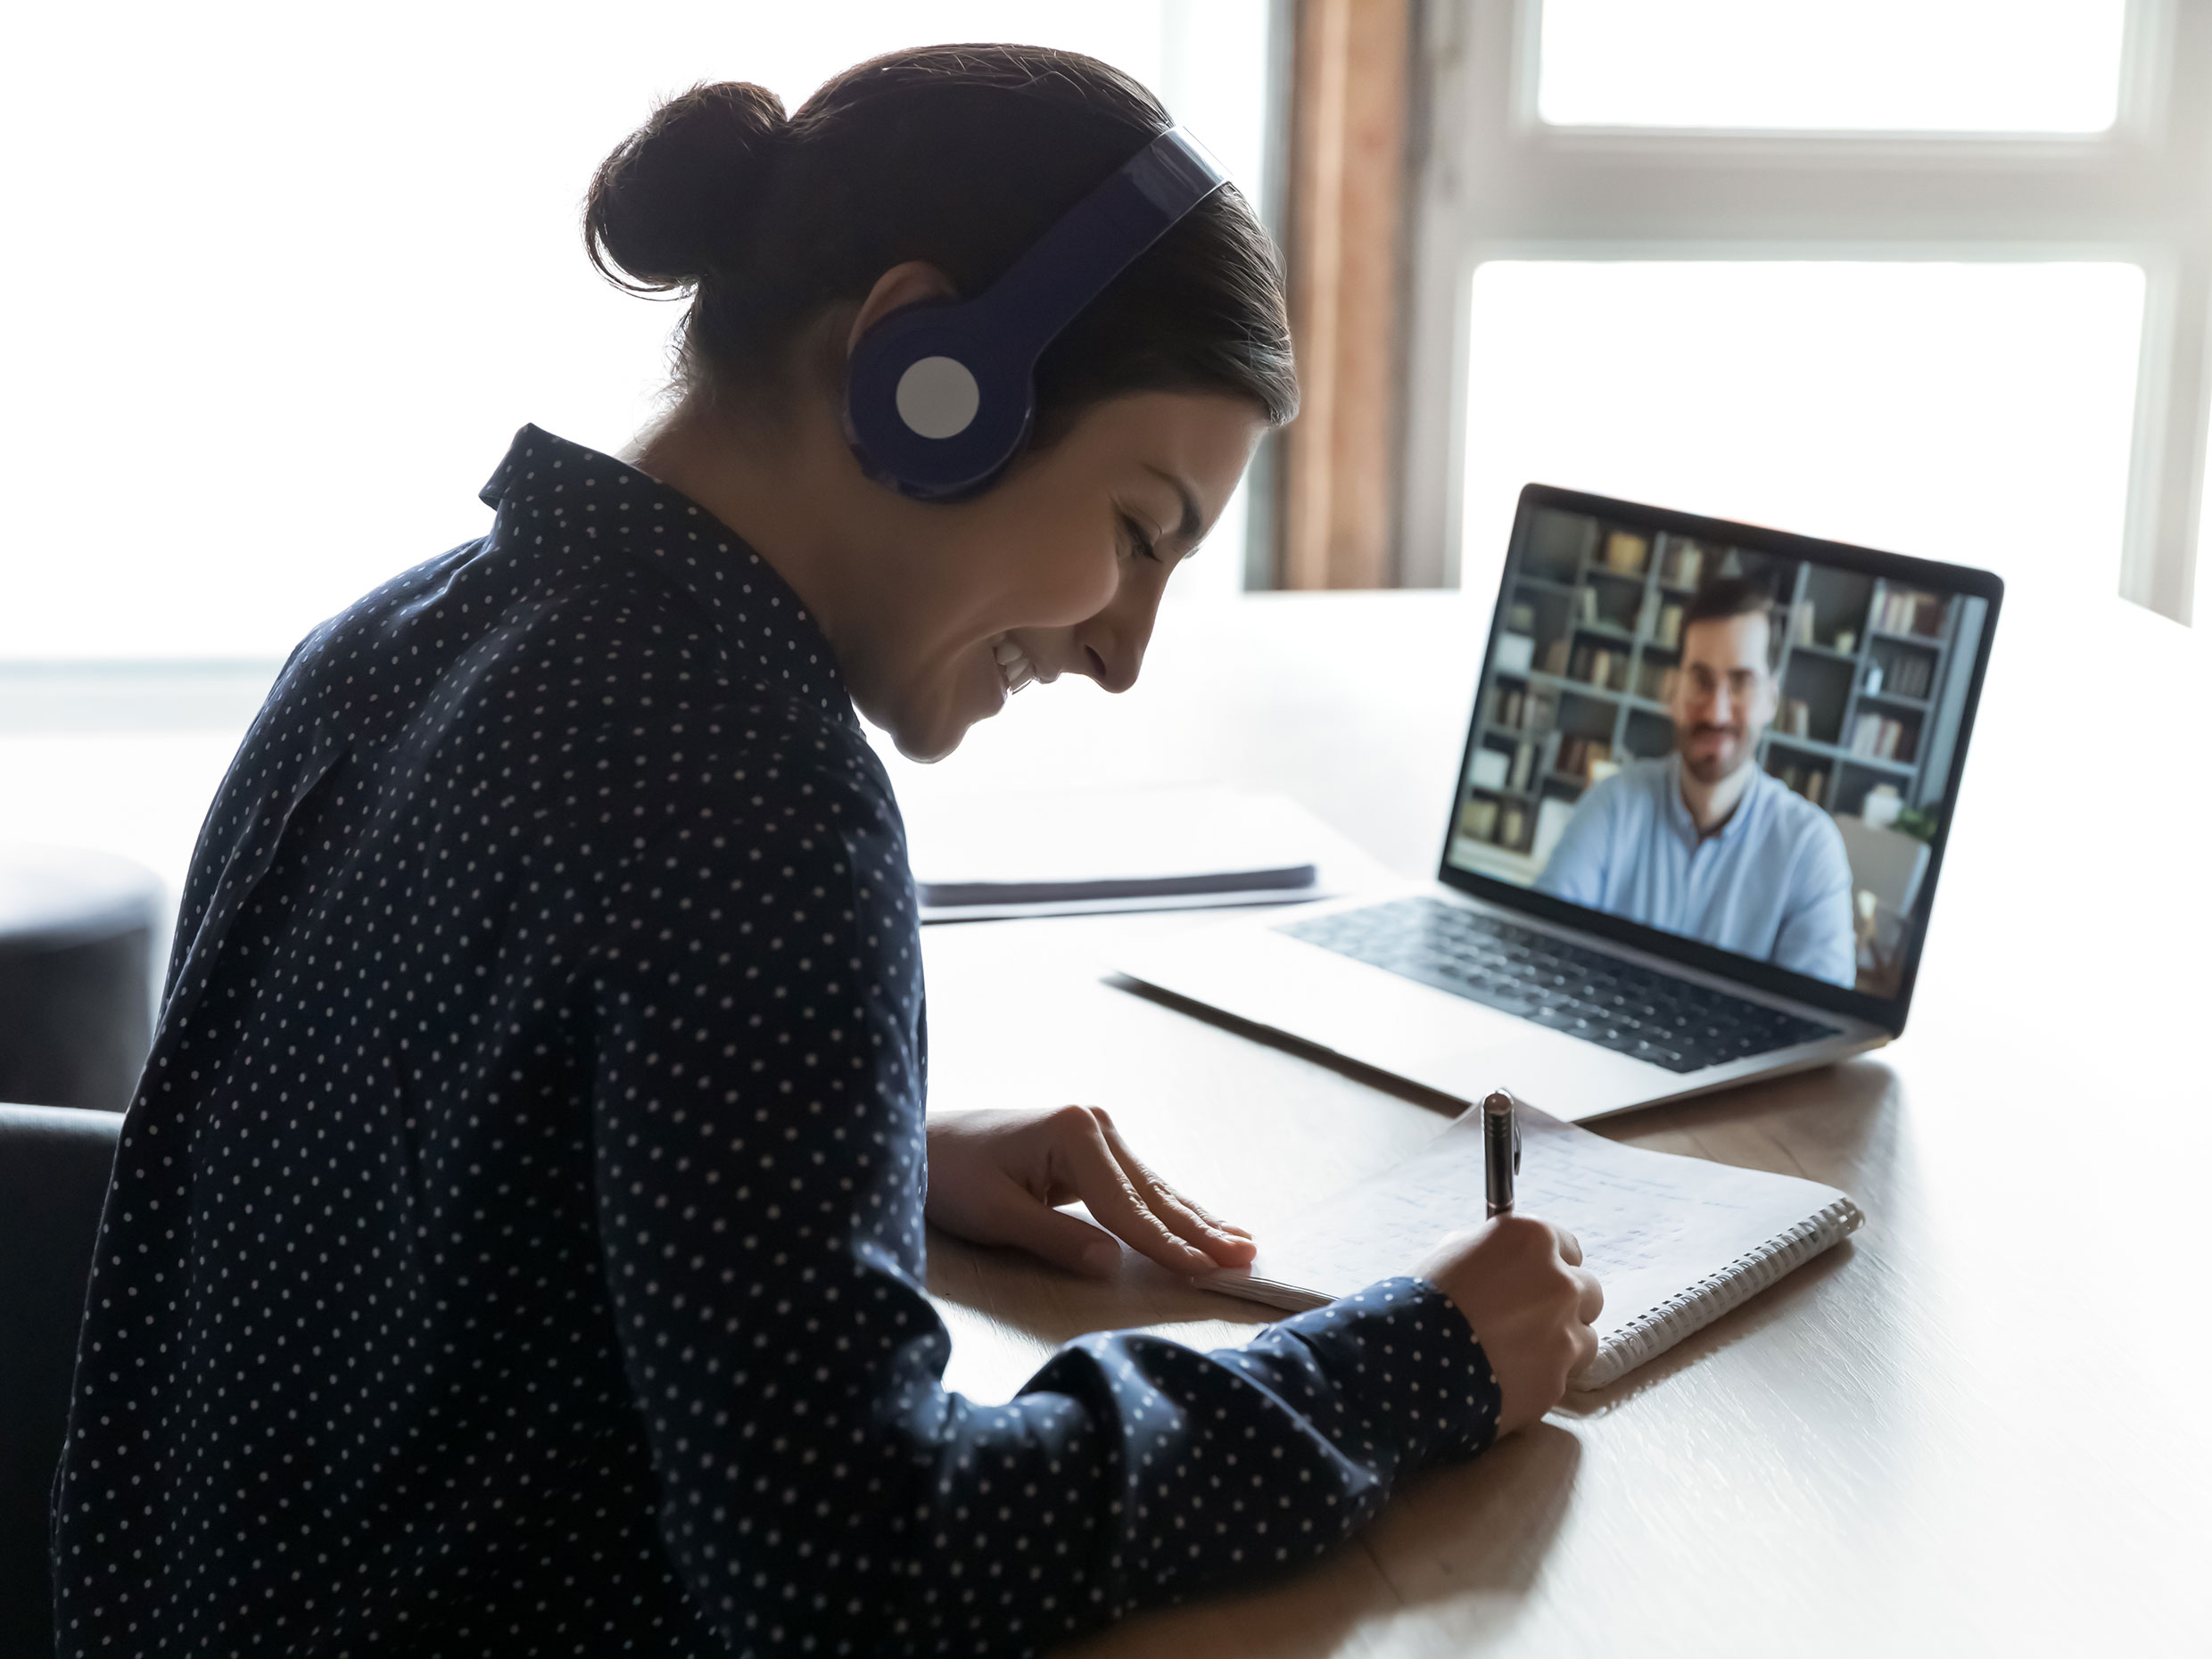 A smiling female student sitting in front of her laptop with headphones on her head having an online class with her instructor and making some notes.